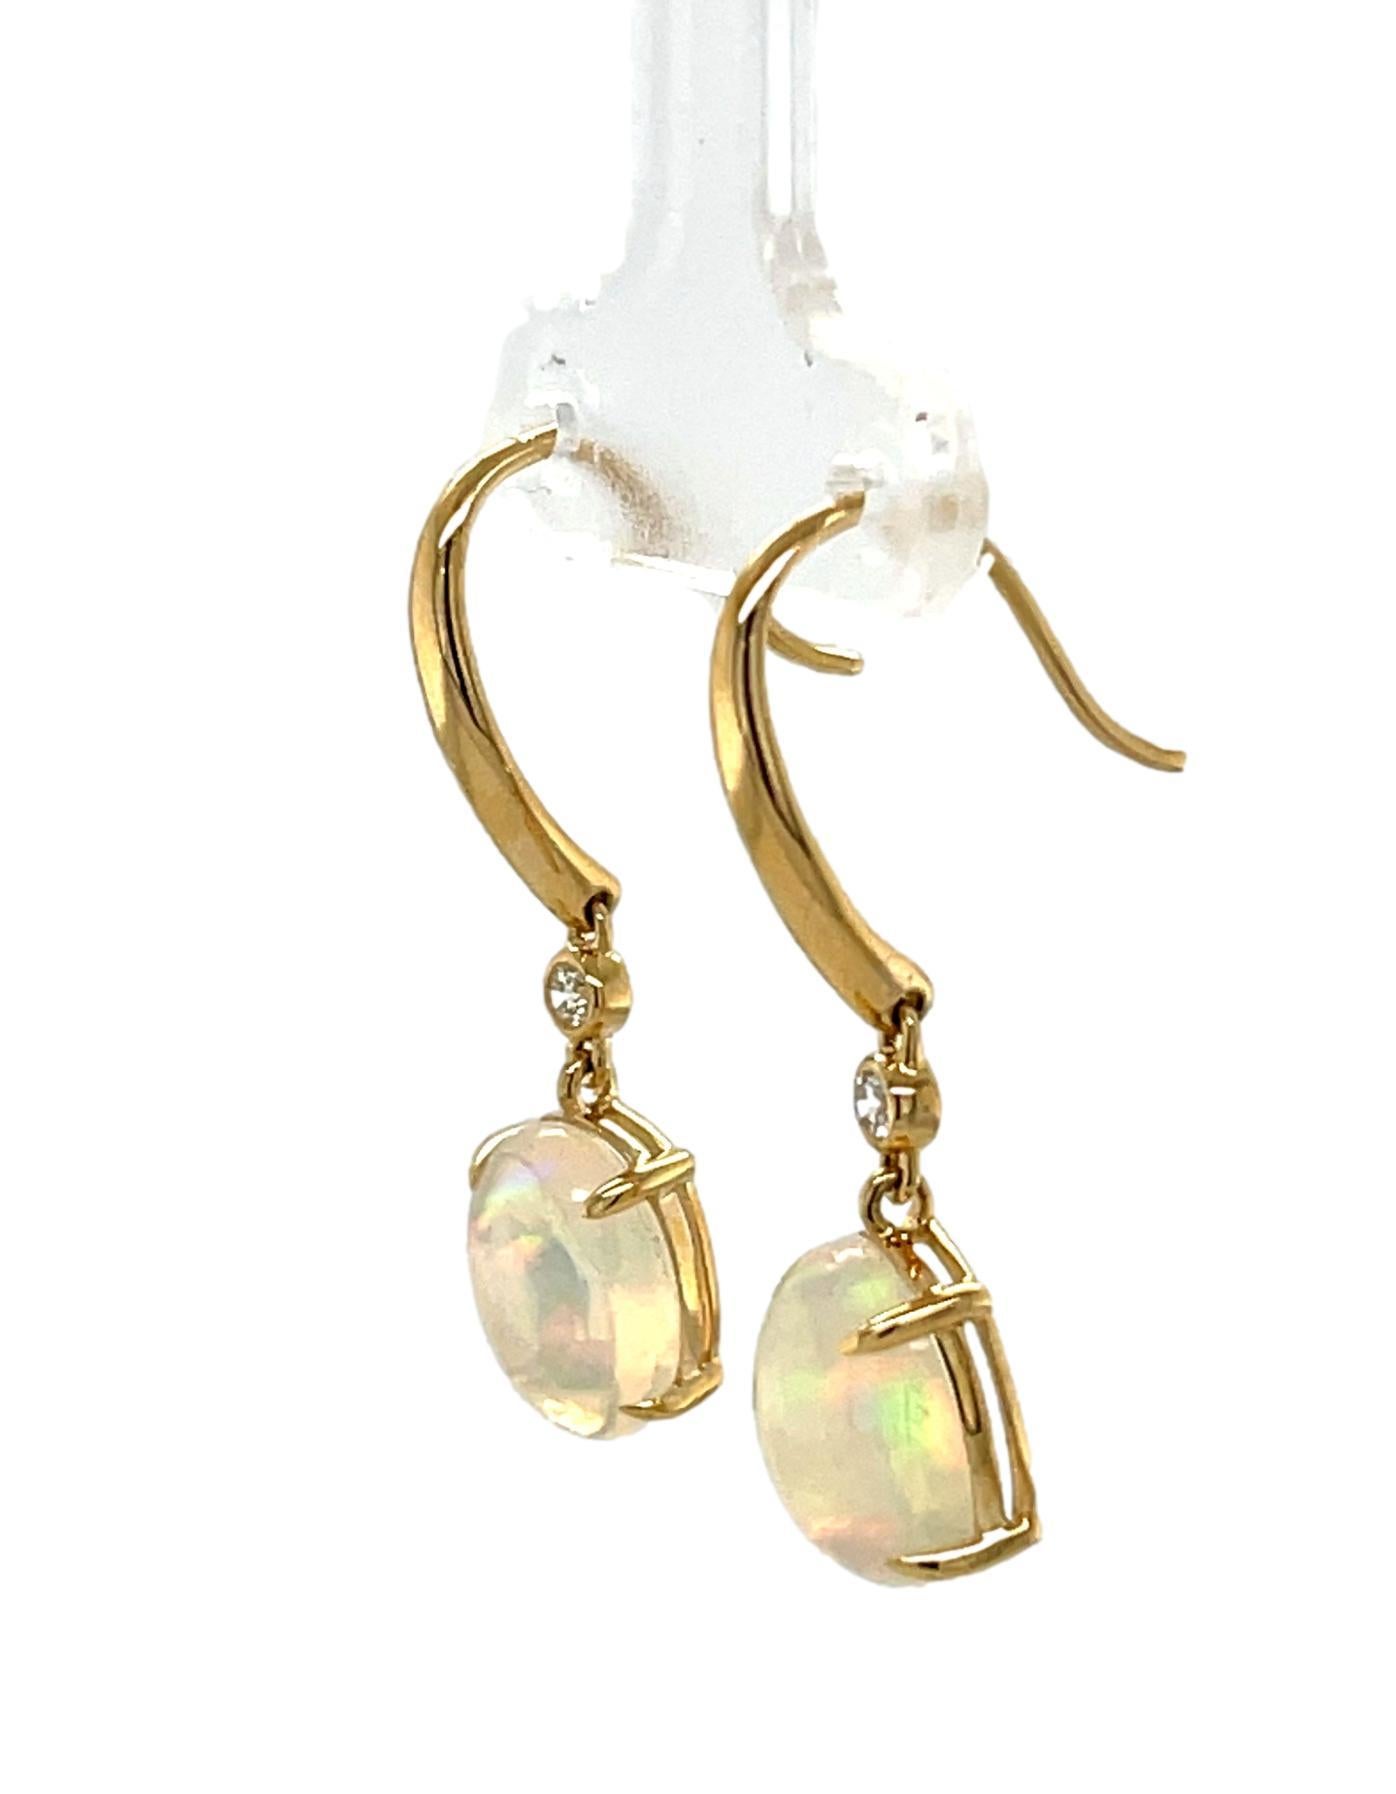 These stunning Ethiopian Opal and diamond dangling Hoop earrings are 4 prong set in 14 karat yellow gold. There is one sparkling brilliant cut round diamond on top of the stone for a beautiful accent. These earrings are approximately 1.25 inches in